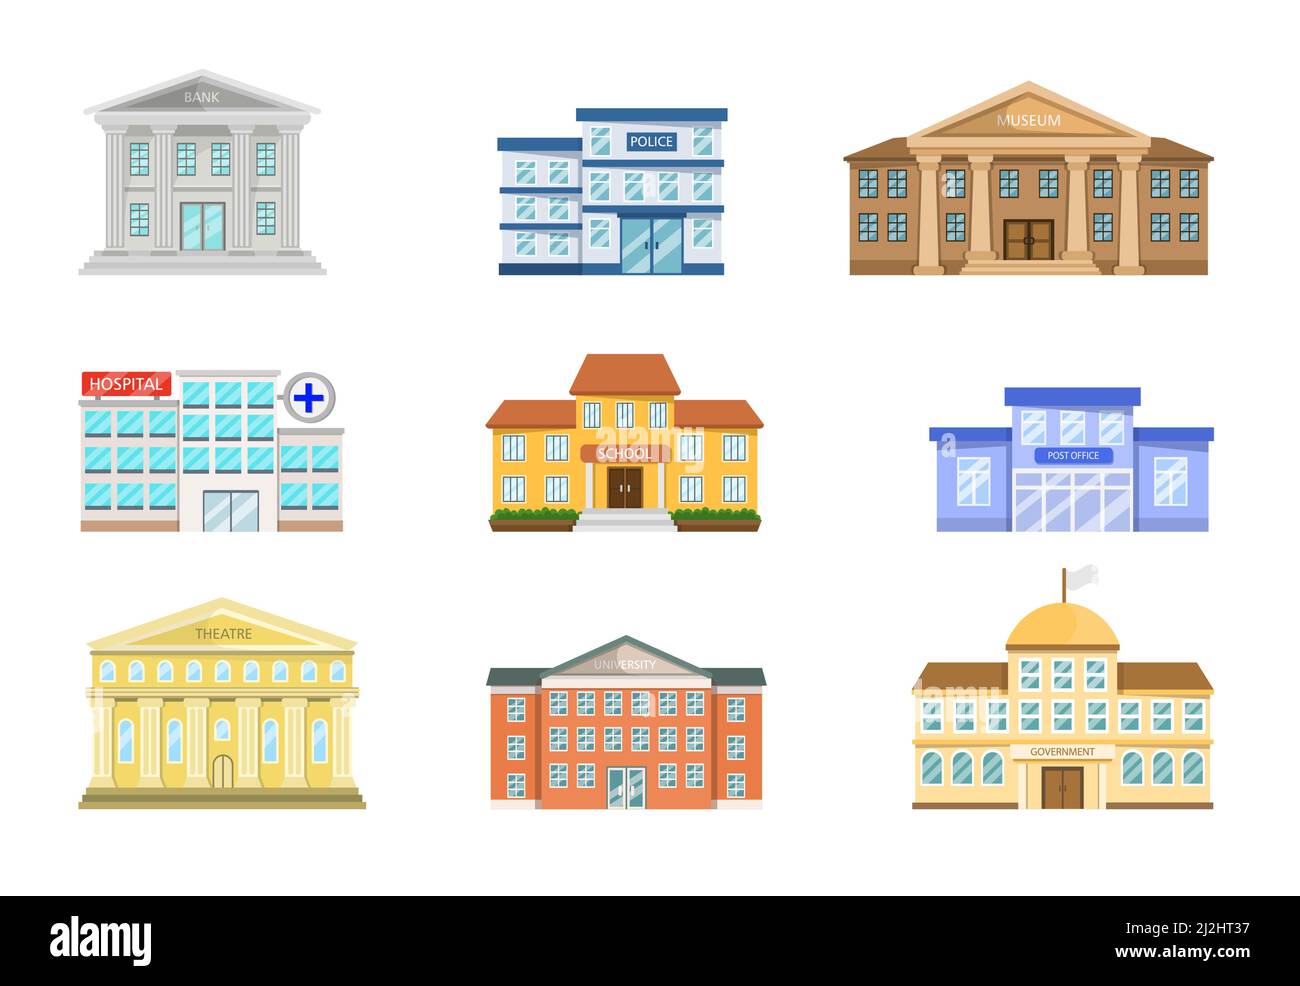 Exterior of museum, hospital, police station, post office, government, bank, school, theatre, university. City, town halls cartoon vector illustration Stock Vector